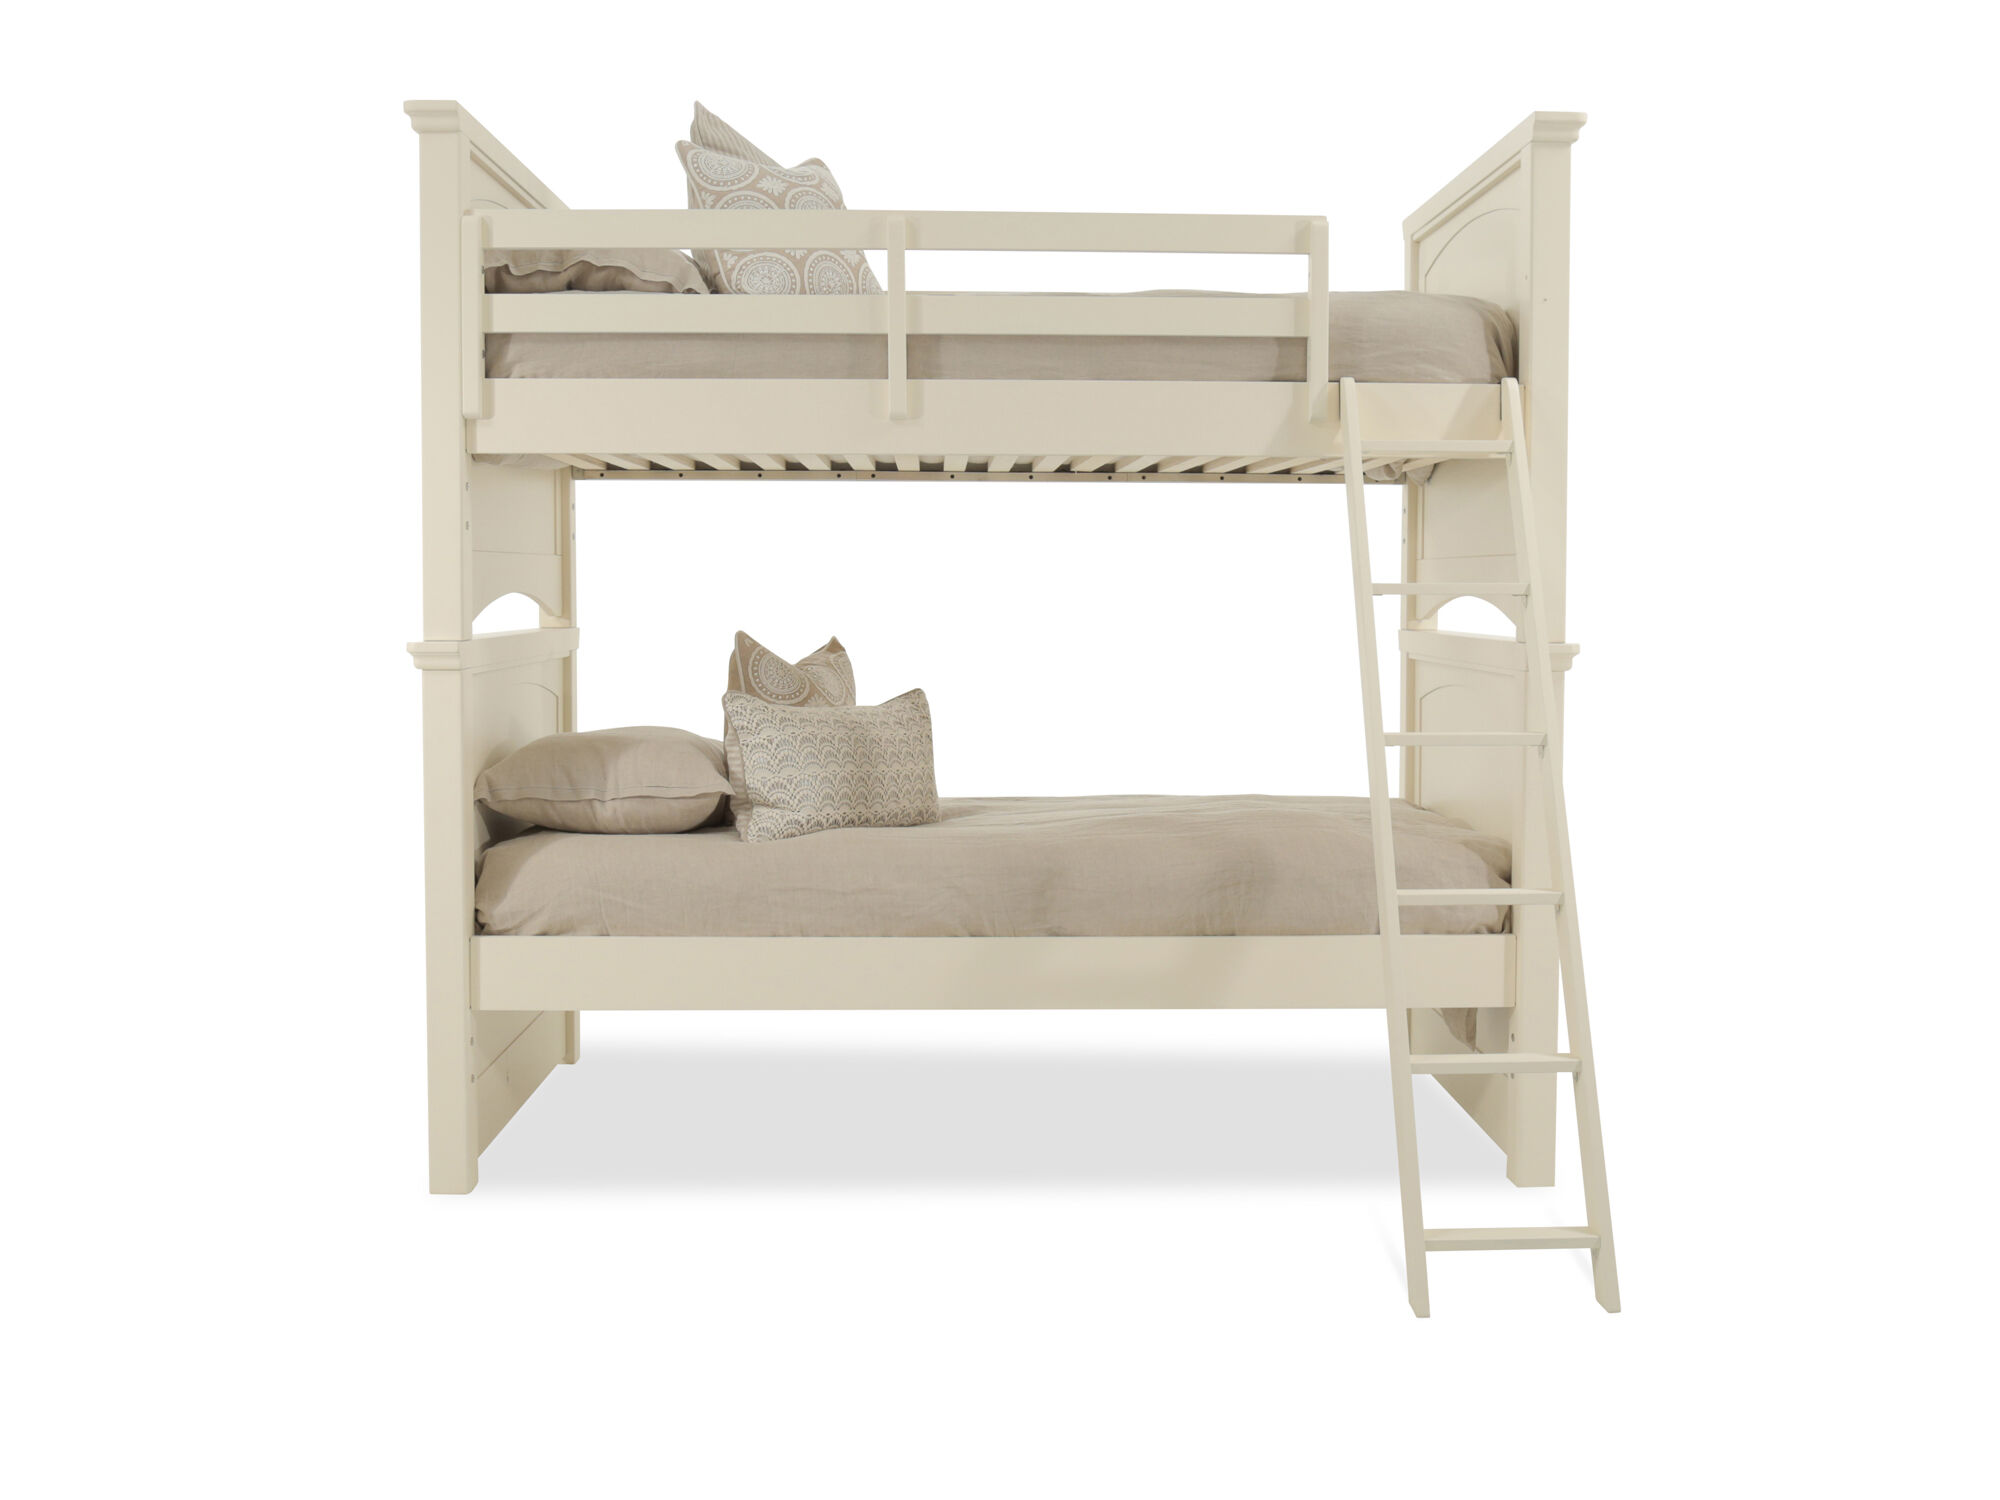 mathis brothers kids furniture